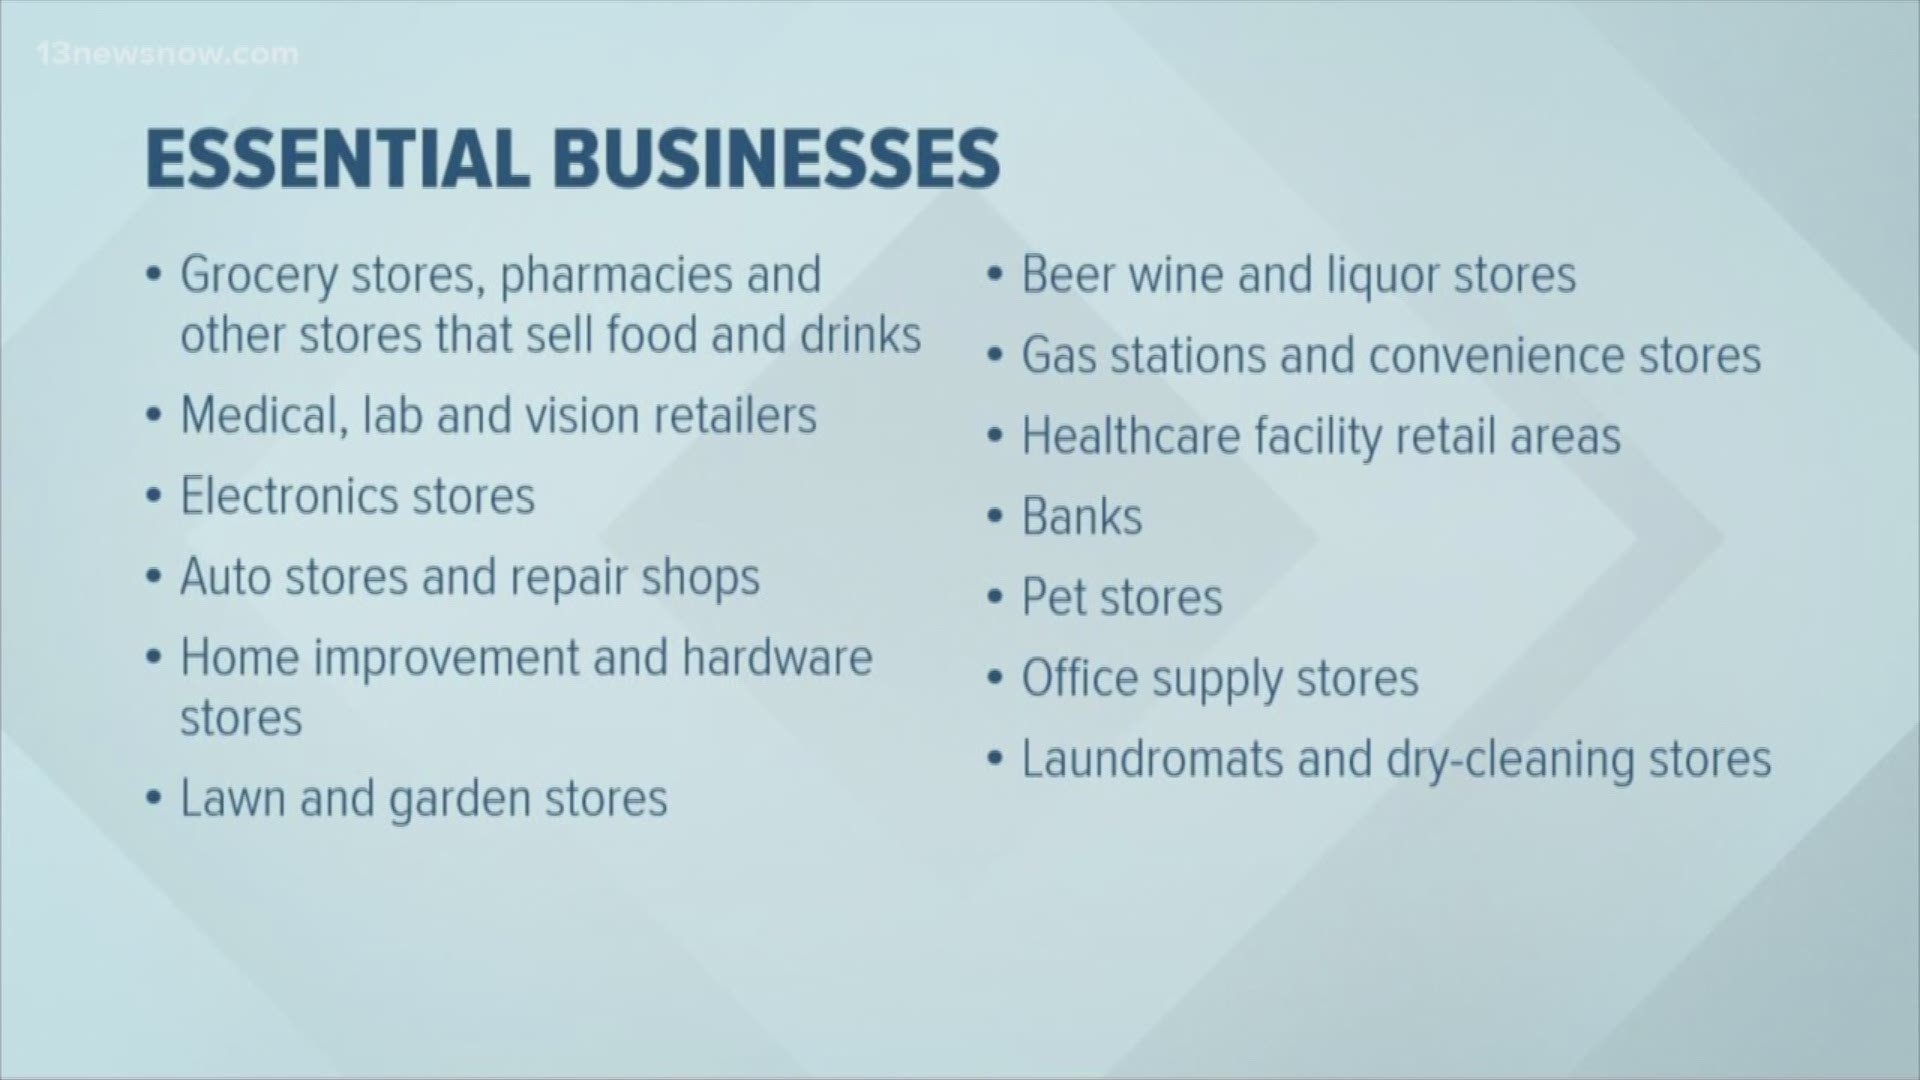 Some of those essential businesses include grocery stores, pharmacies, medical facilities, even liquor stores.